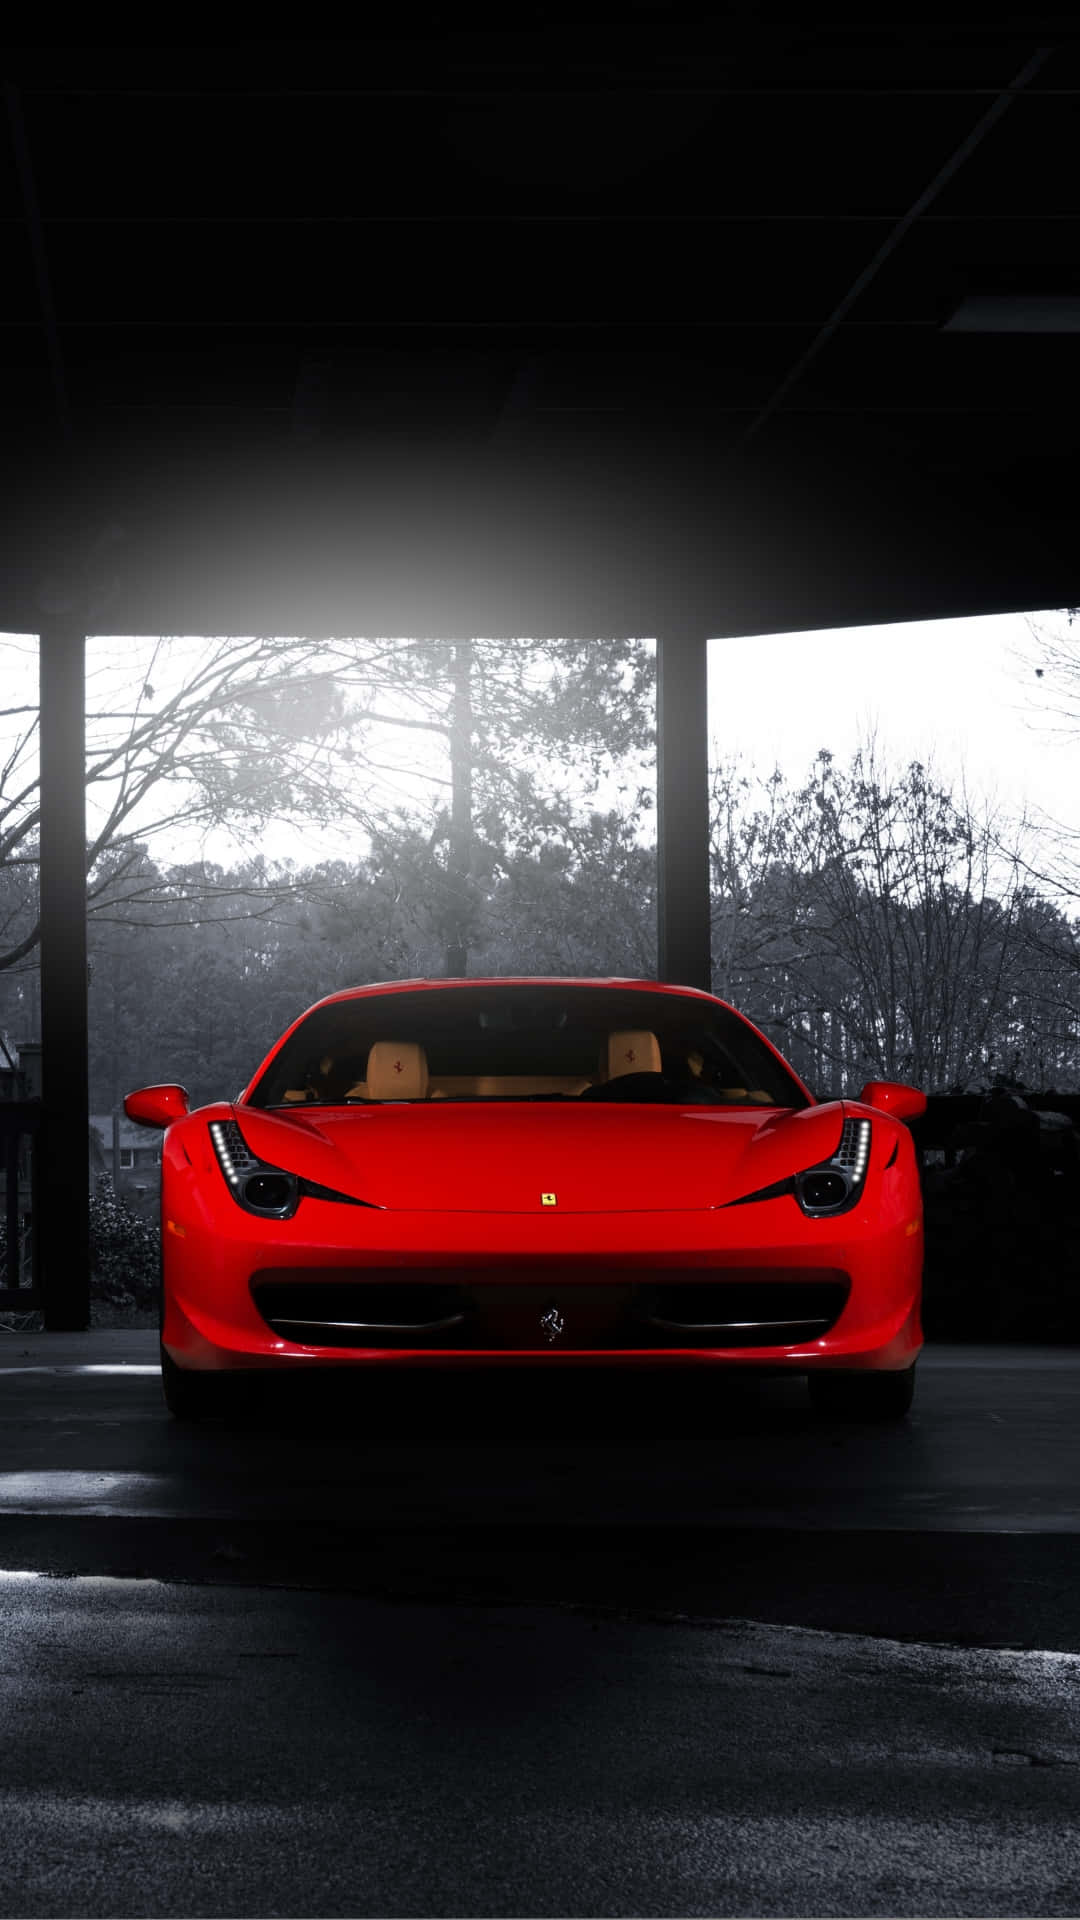 "Feel the power of luxury with your Ferrari Iphone X" Wallpaper